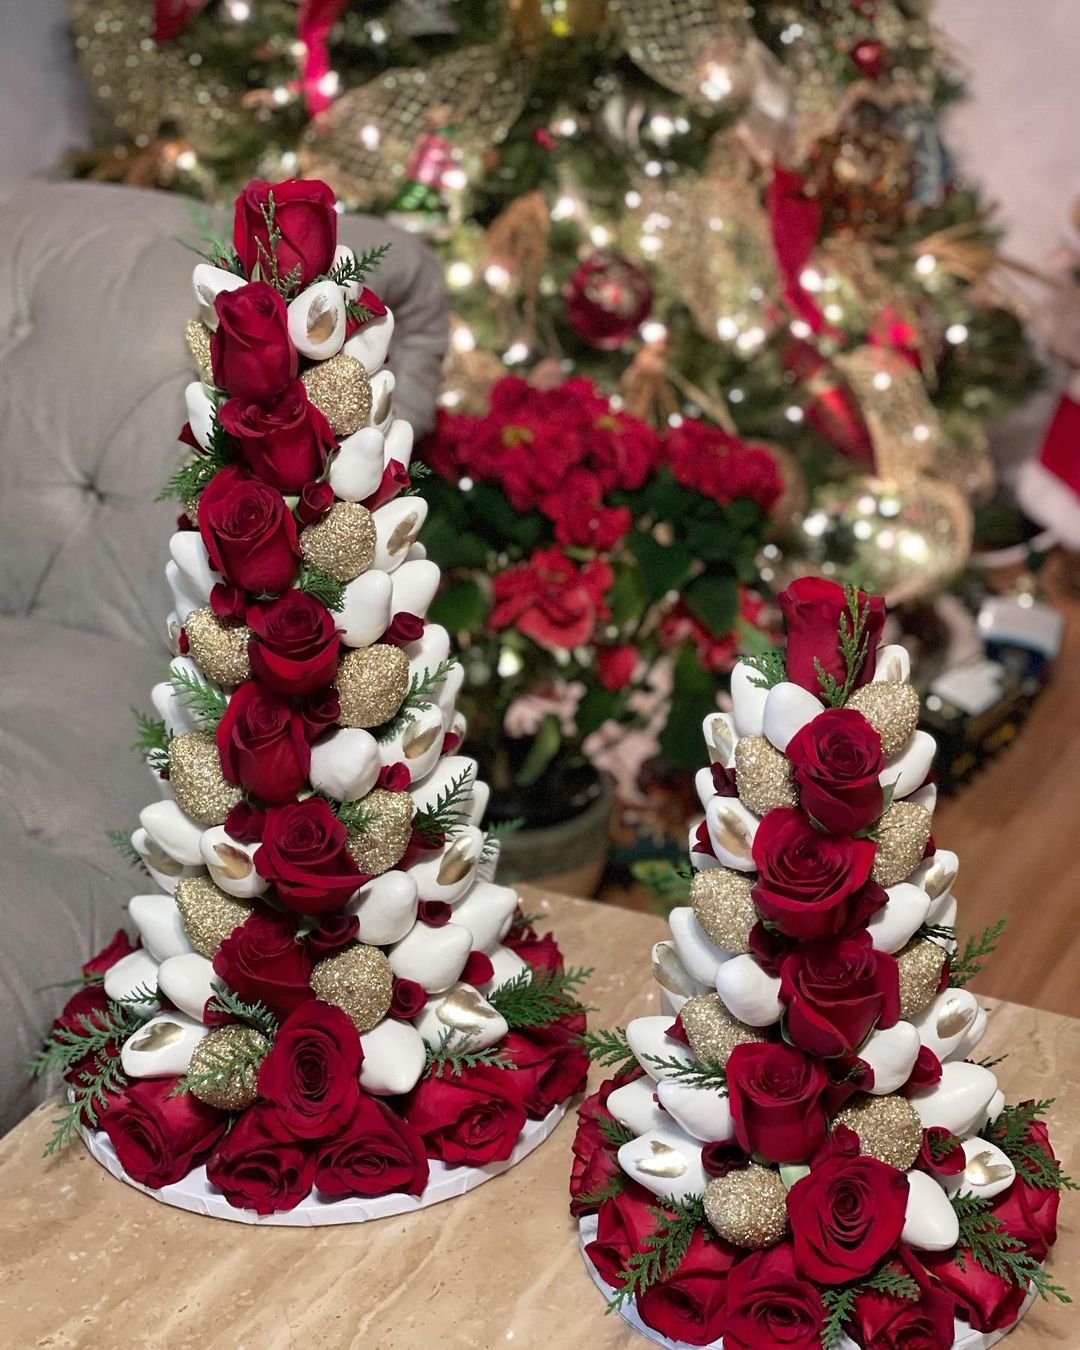 Christmas Chocolate Strawberry Tower with Roses | Festive Dessert and Table Decor | Lunch Bunch